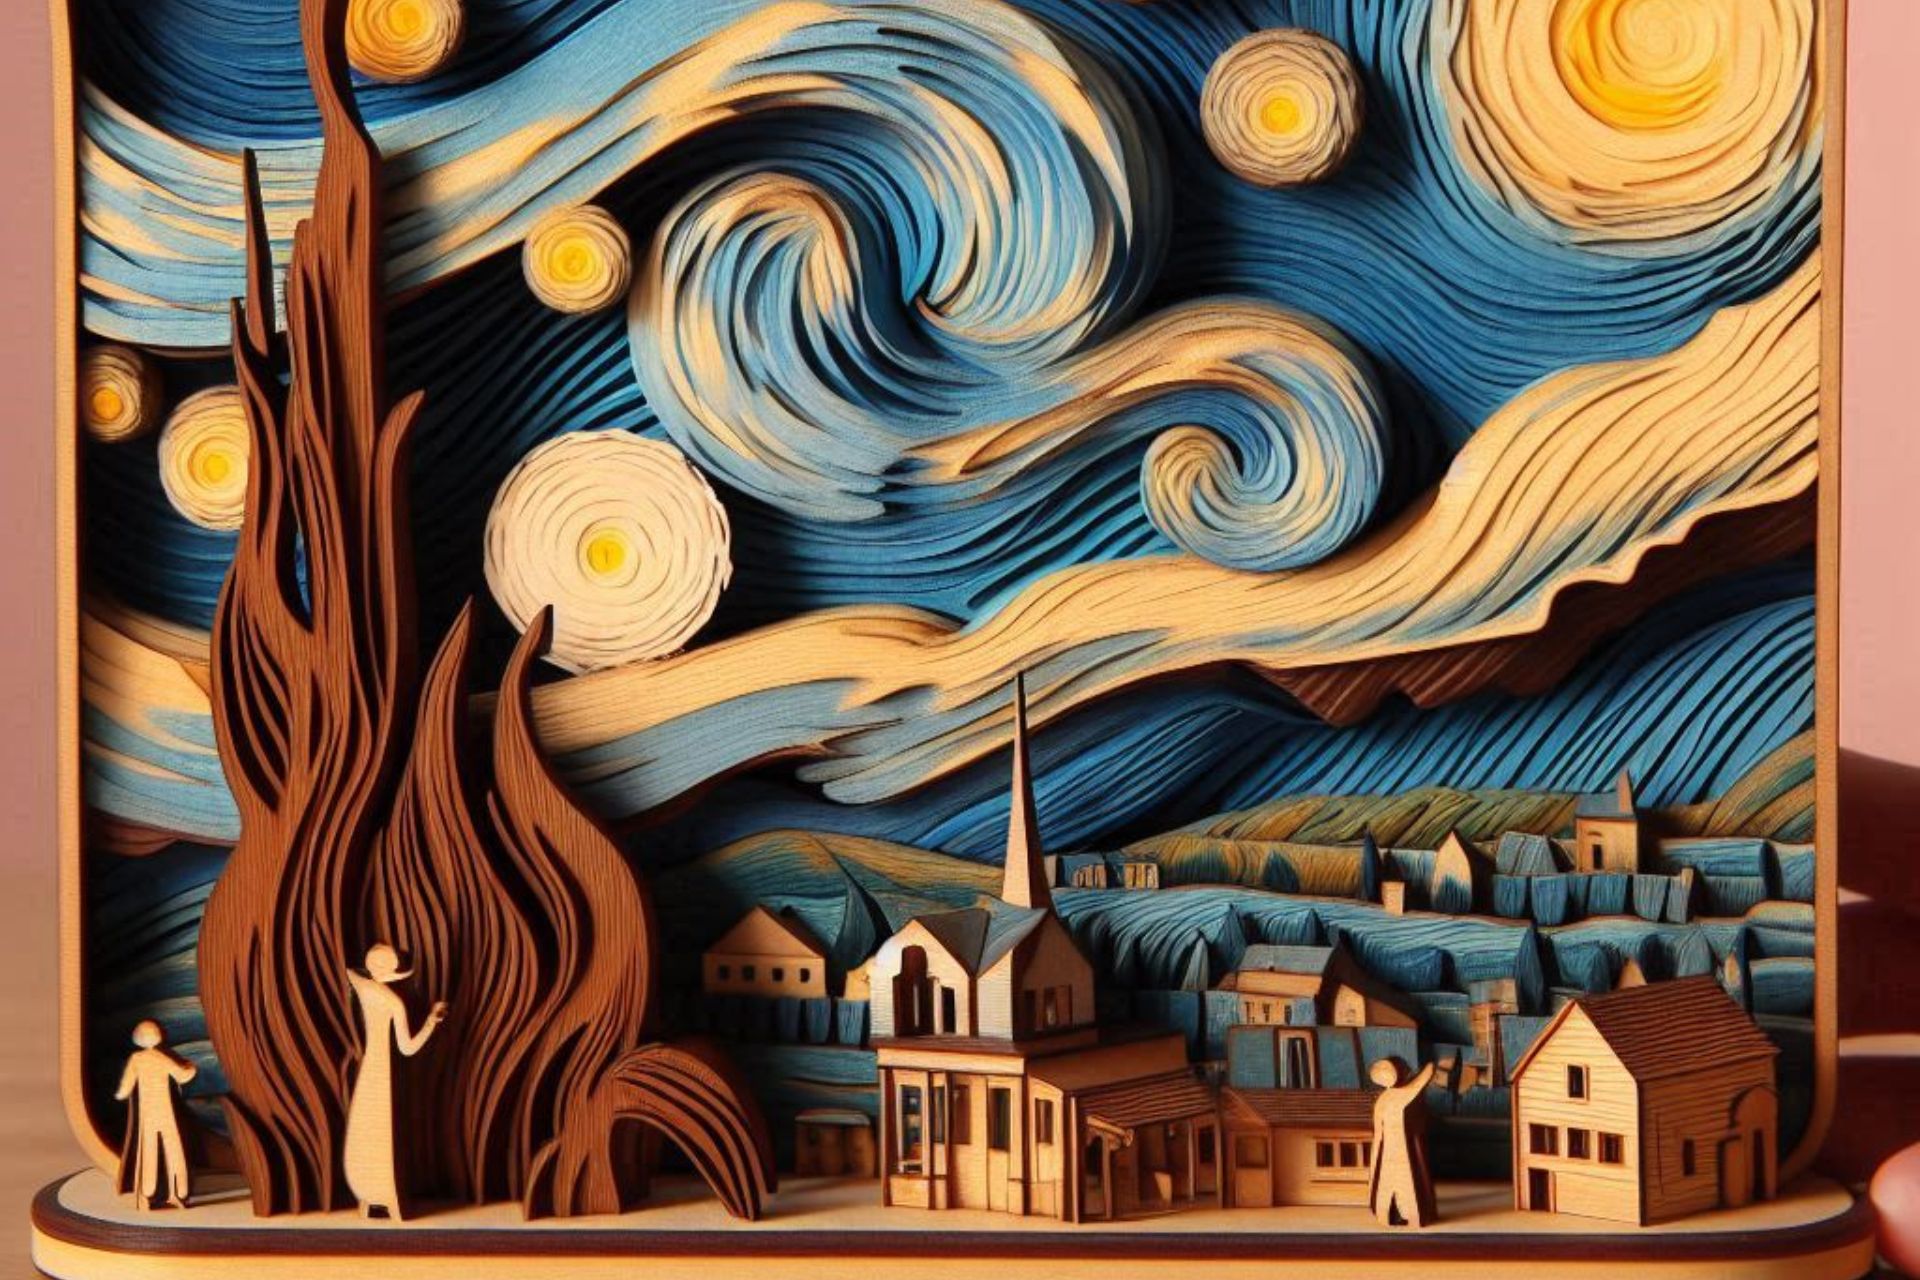 Vincent van Gogh Starry Night reimagined as a 3d wooden model by AI to promote accessibility